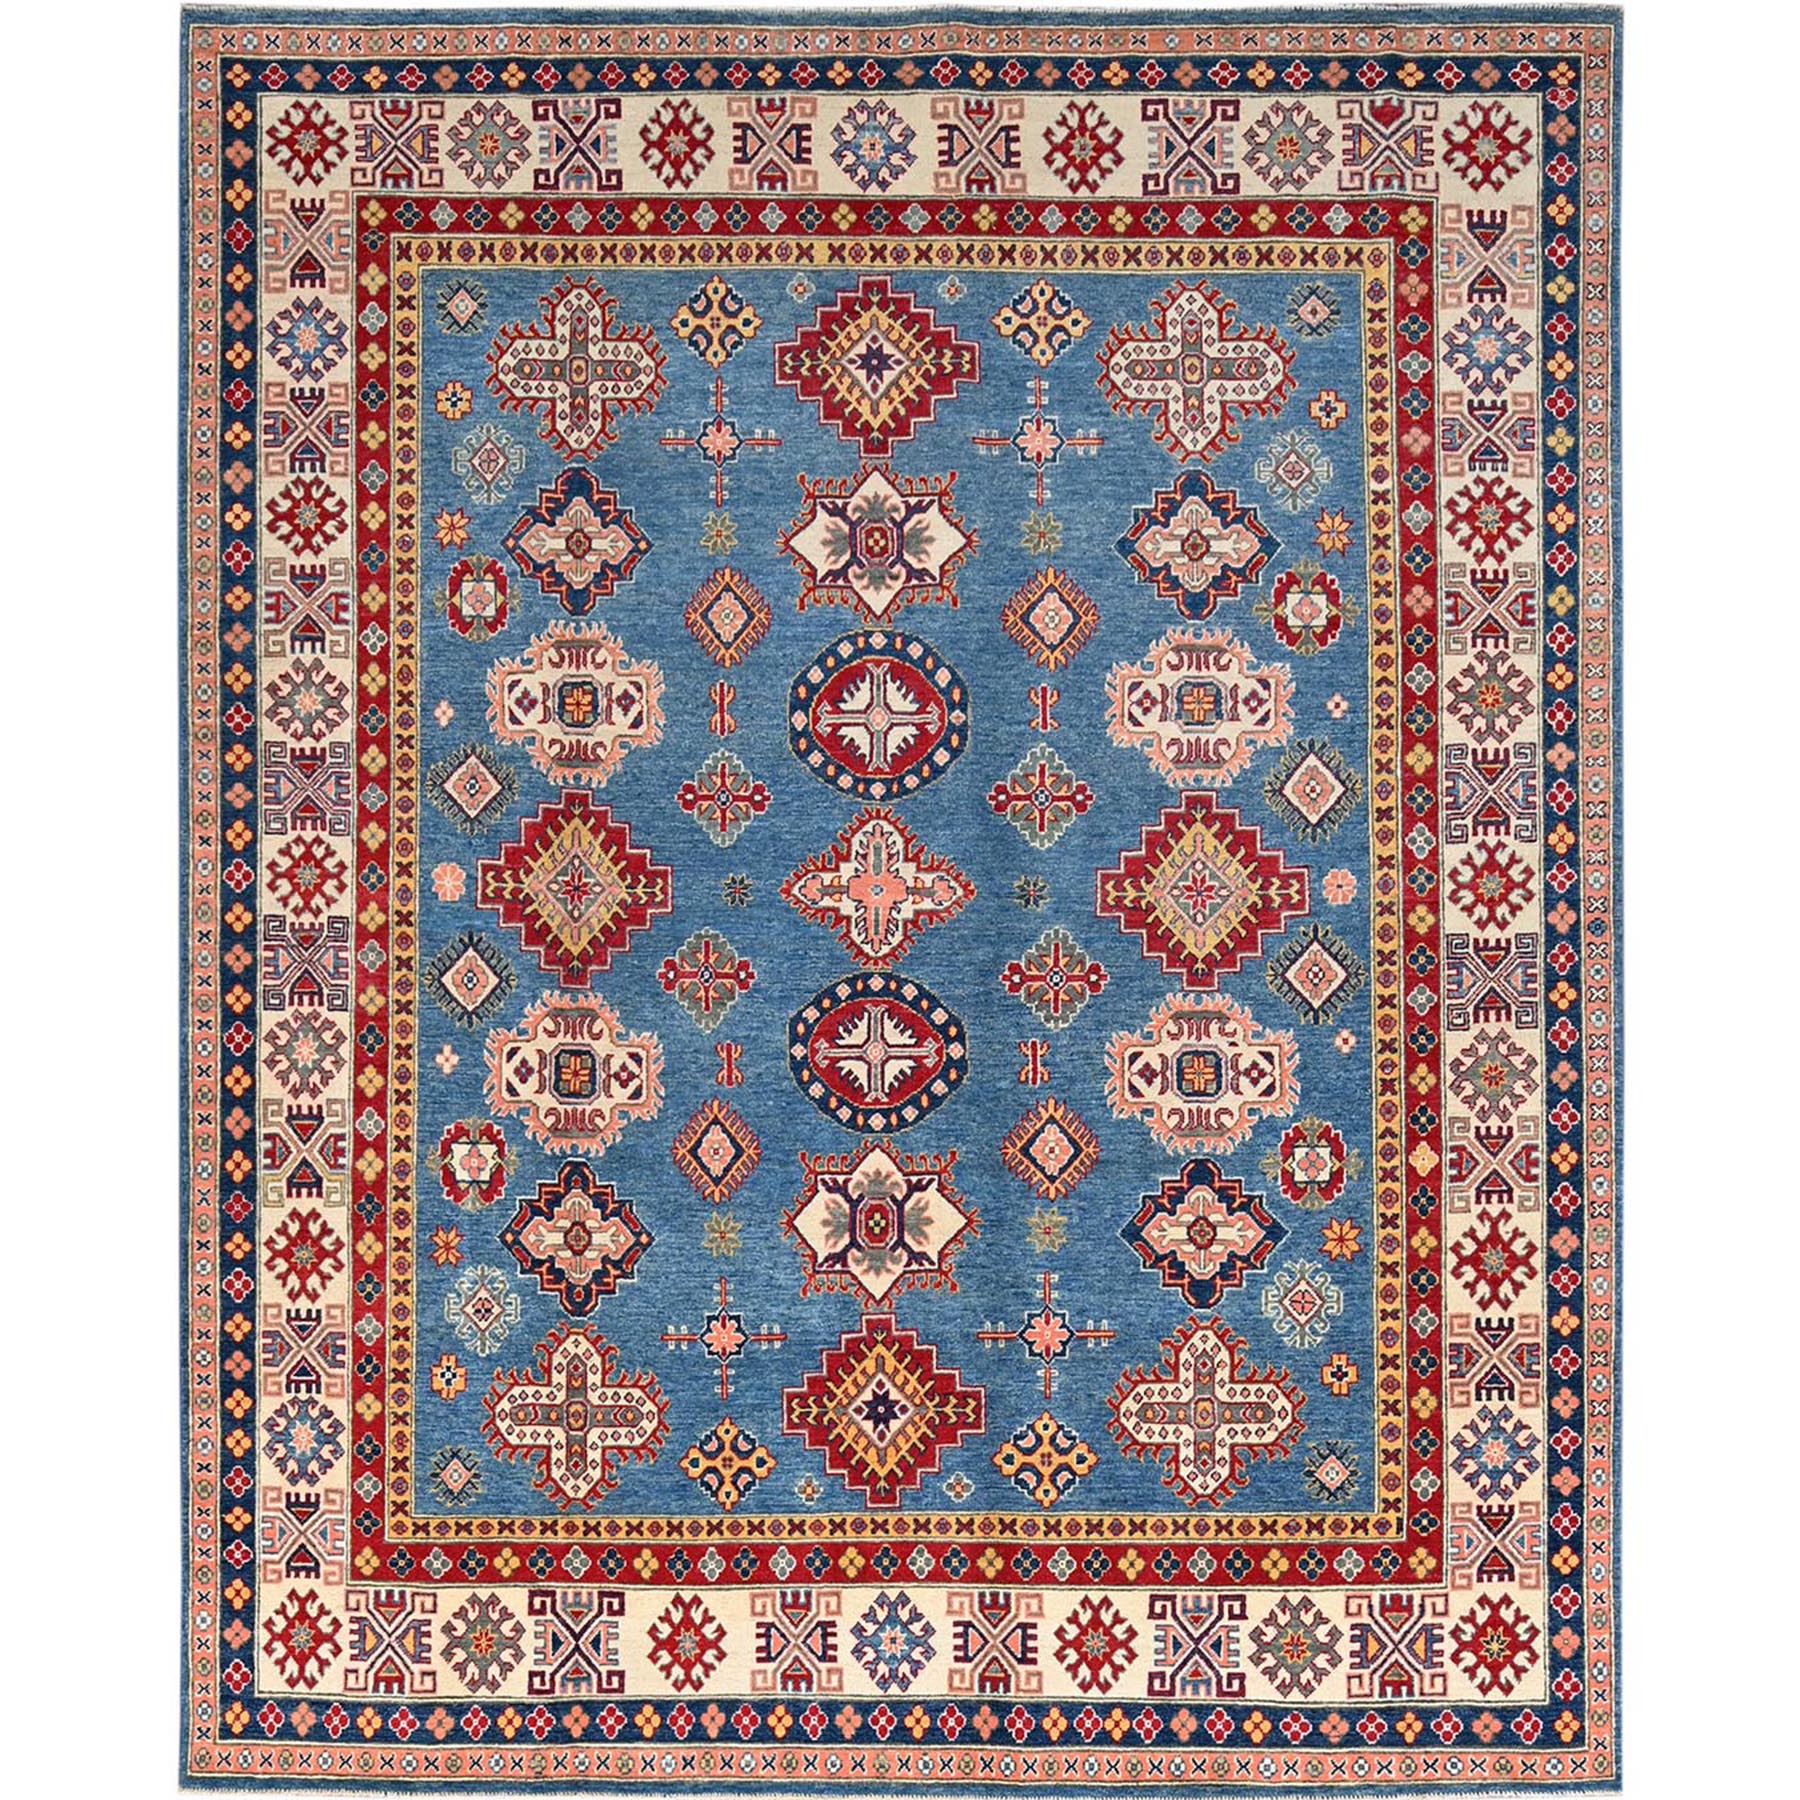 Quite Harbor Blue With Heavenly Pink Border, Hand Knotted Kazak Design With Tribal Medallions Organic Dyes, 100% Wool, Oriental Rug